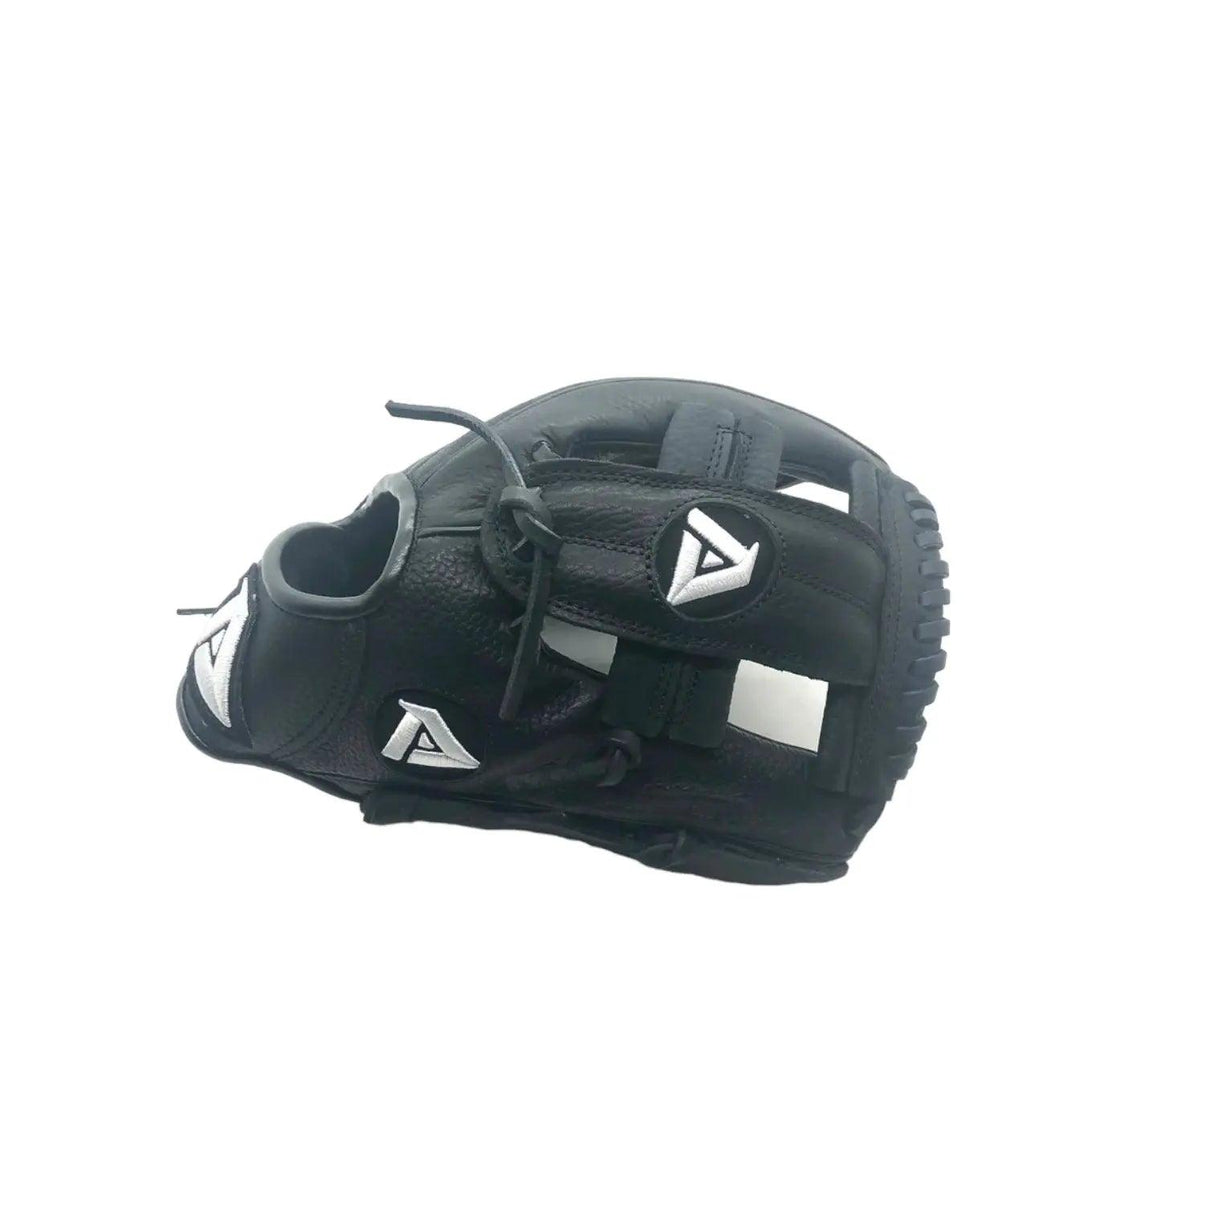 Akadema Youth Glove Rookie Series 11” In Ages 7-10 Black - CustomBallgloves.com